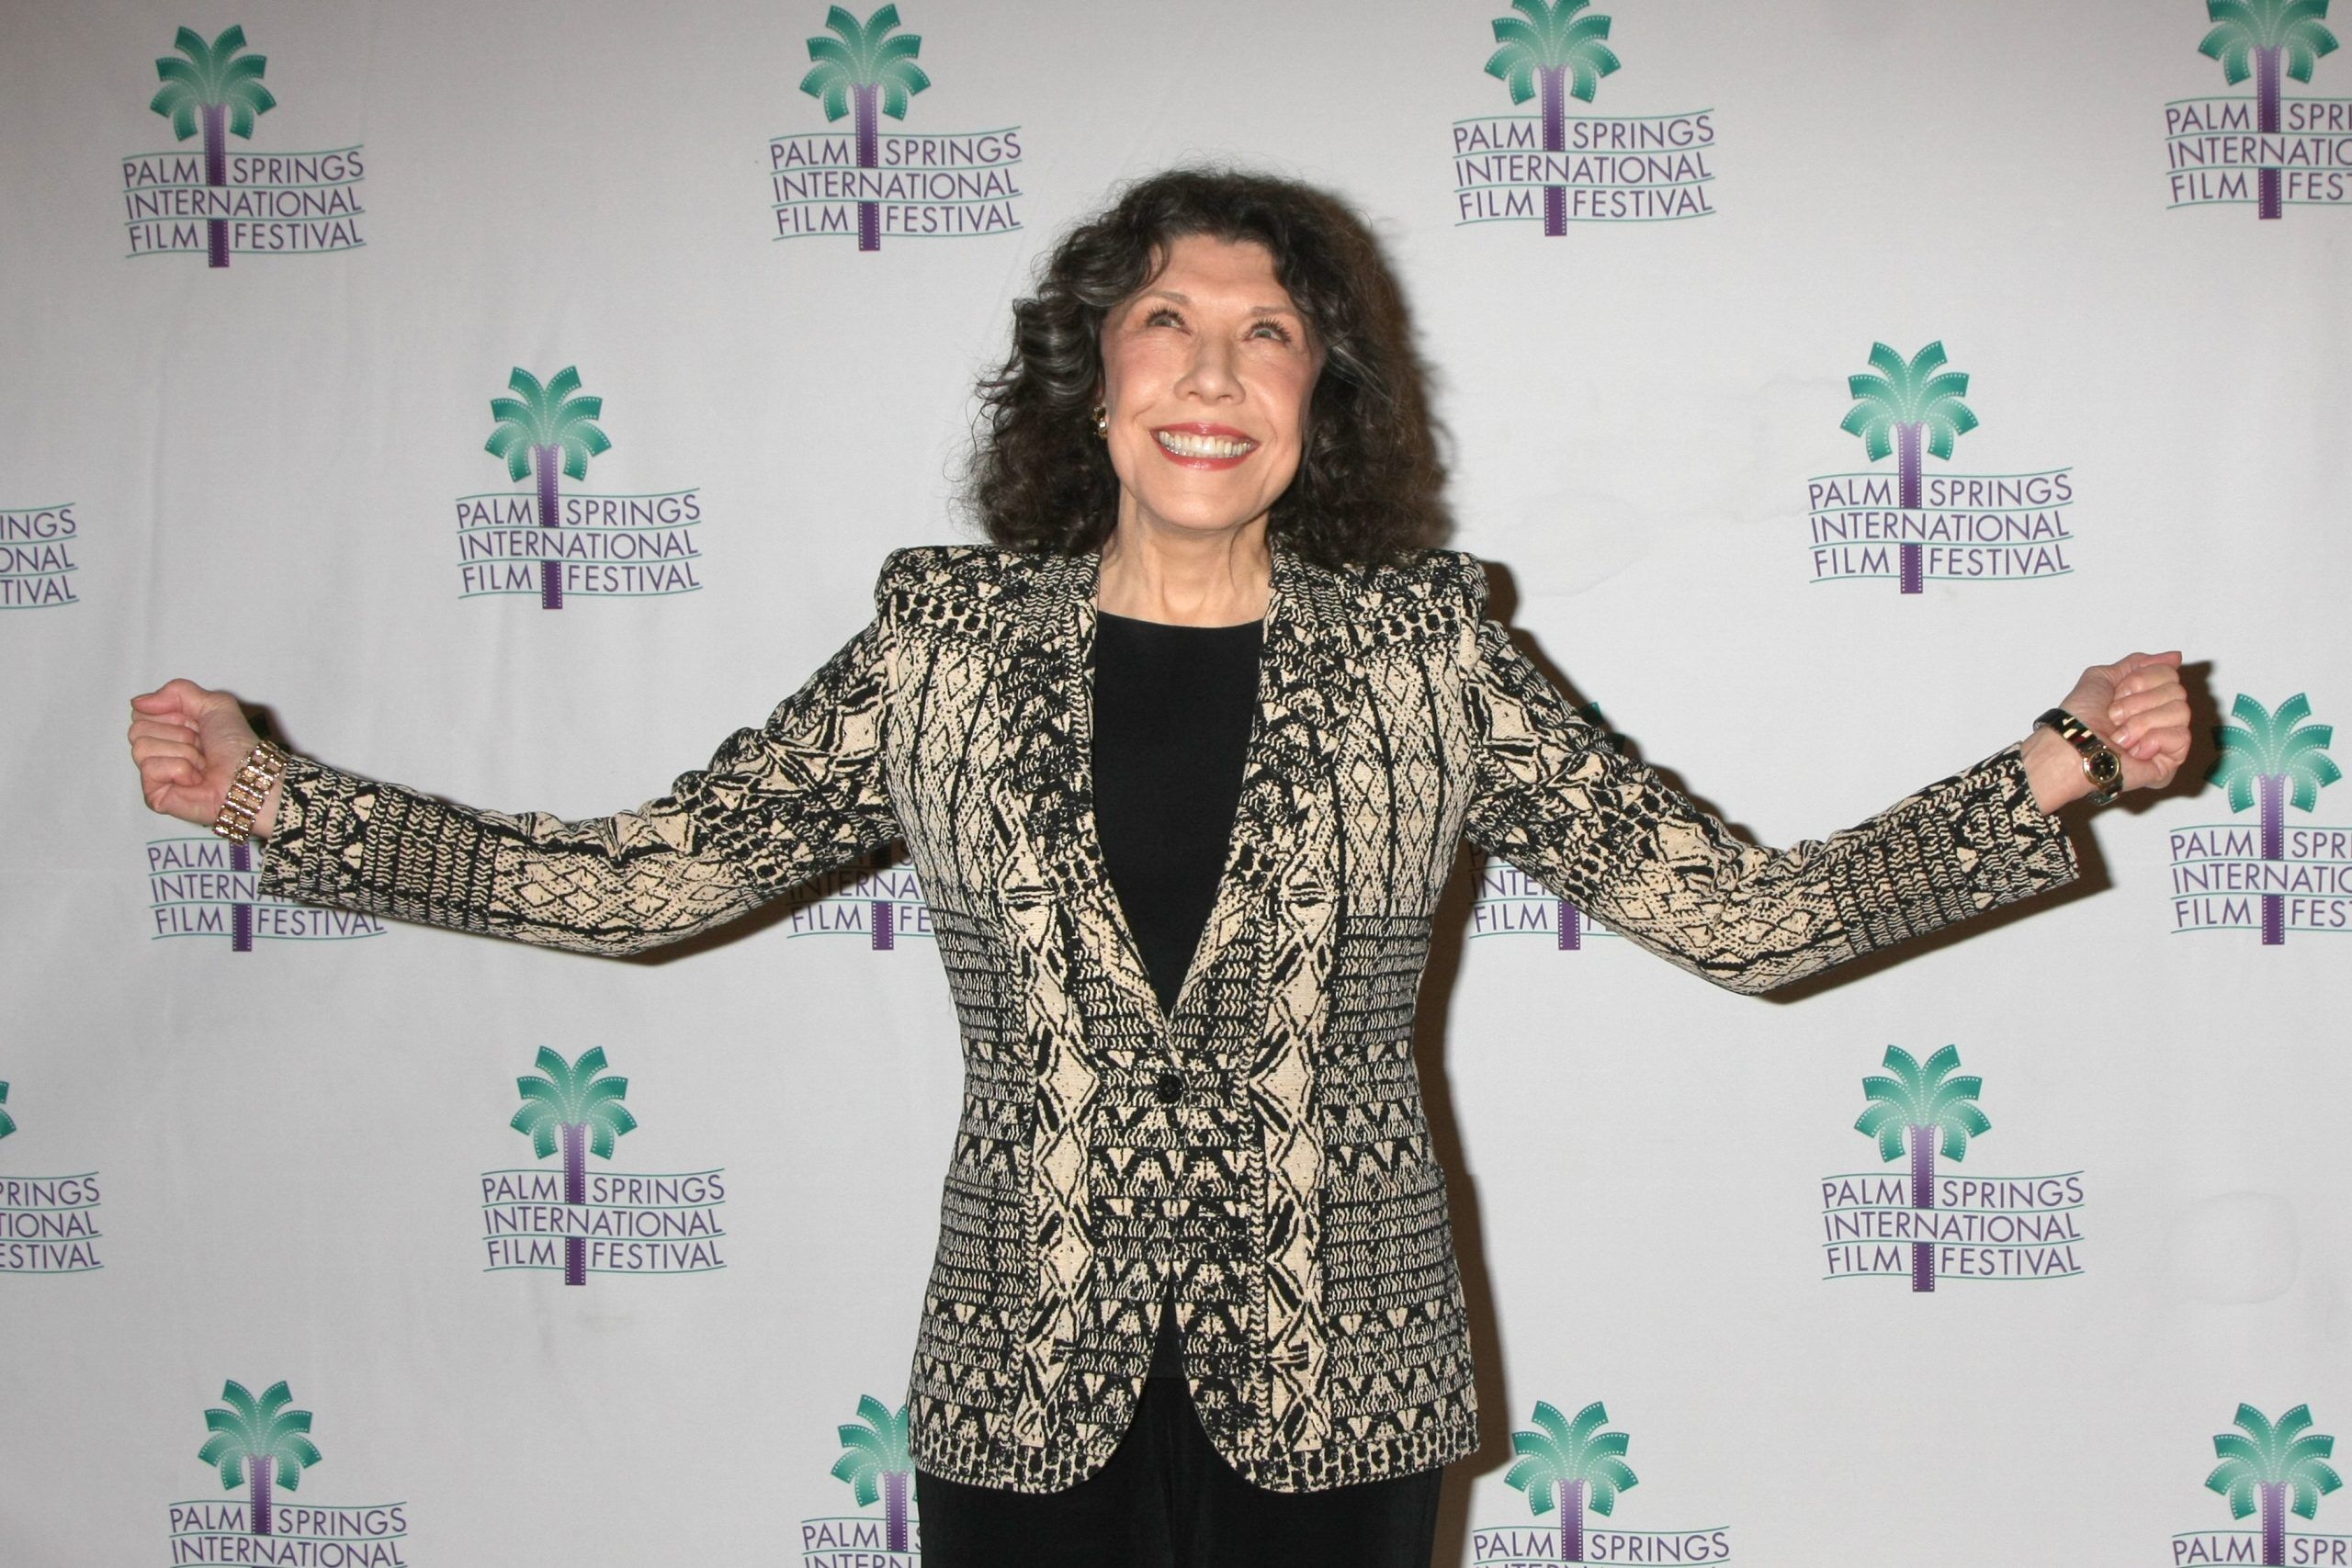 Lily Tomlin at the "Grandma" Q & A at PSIFF at the Annenberg Theater at Palm Springs Art Museum on January 4, 2016 in Palm Springs, CA